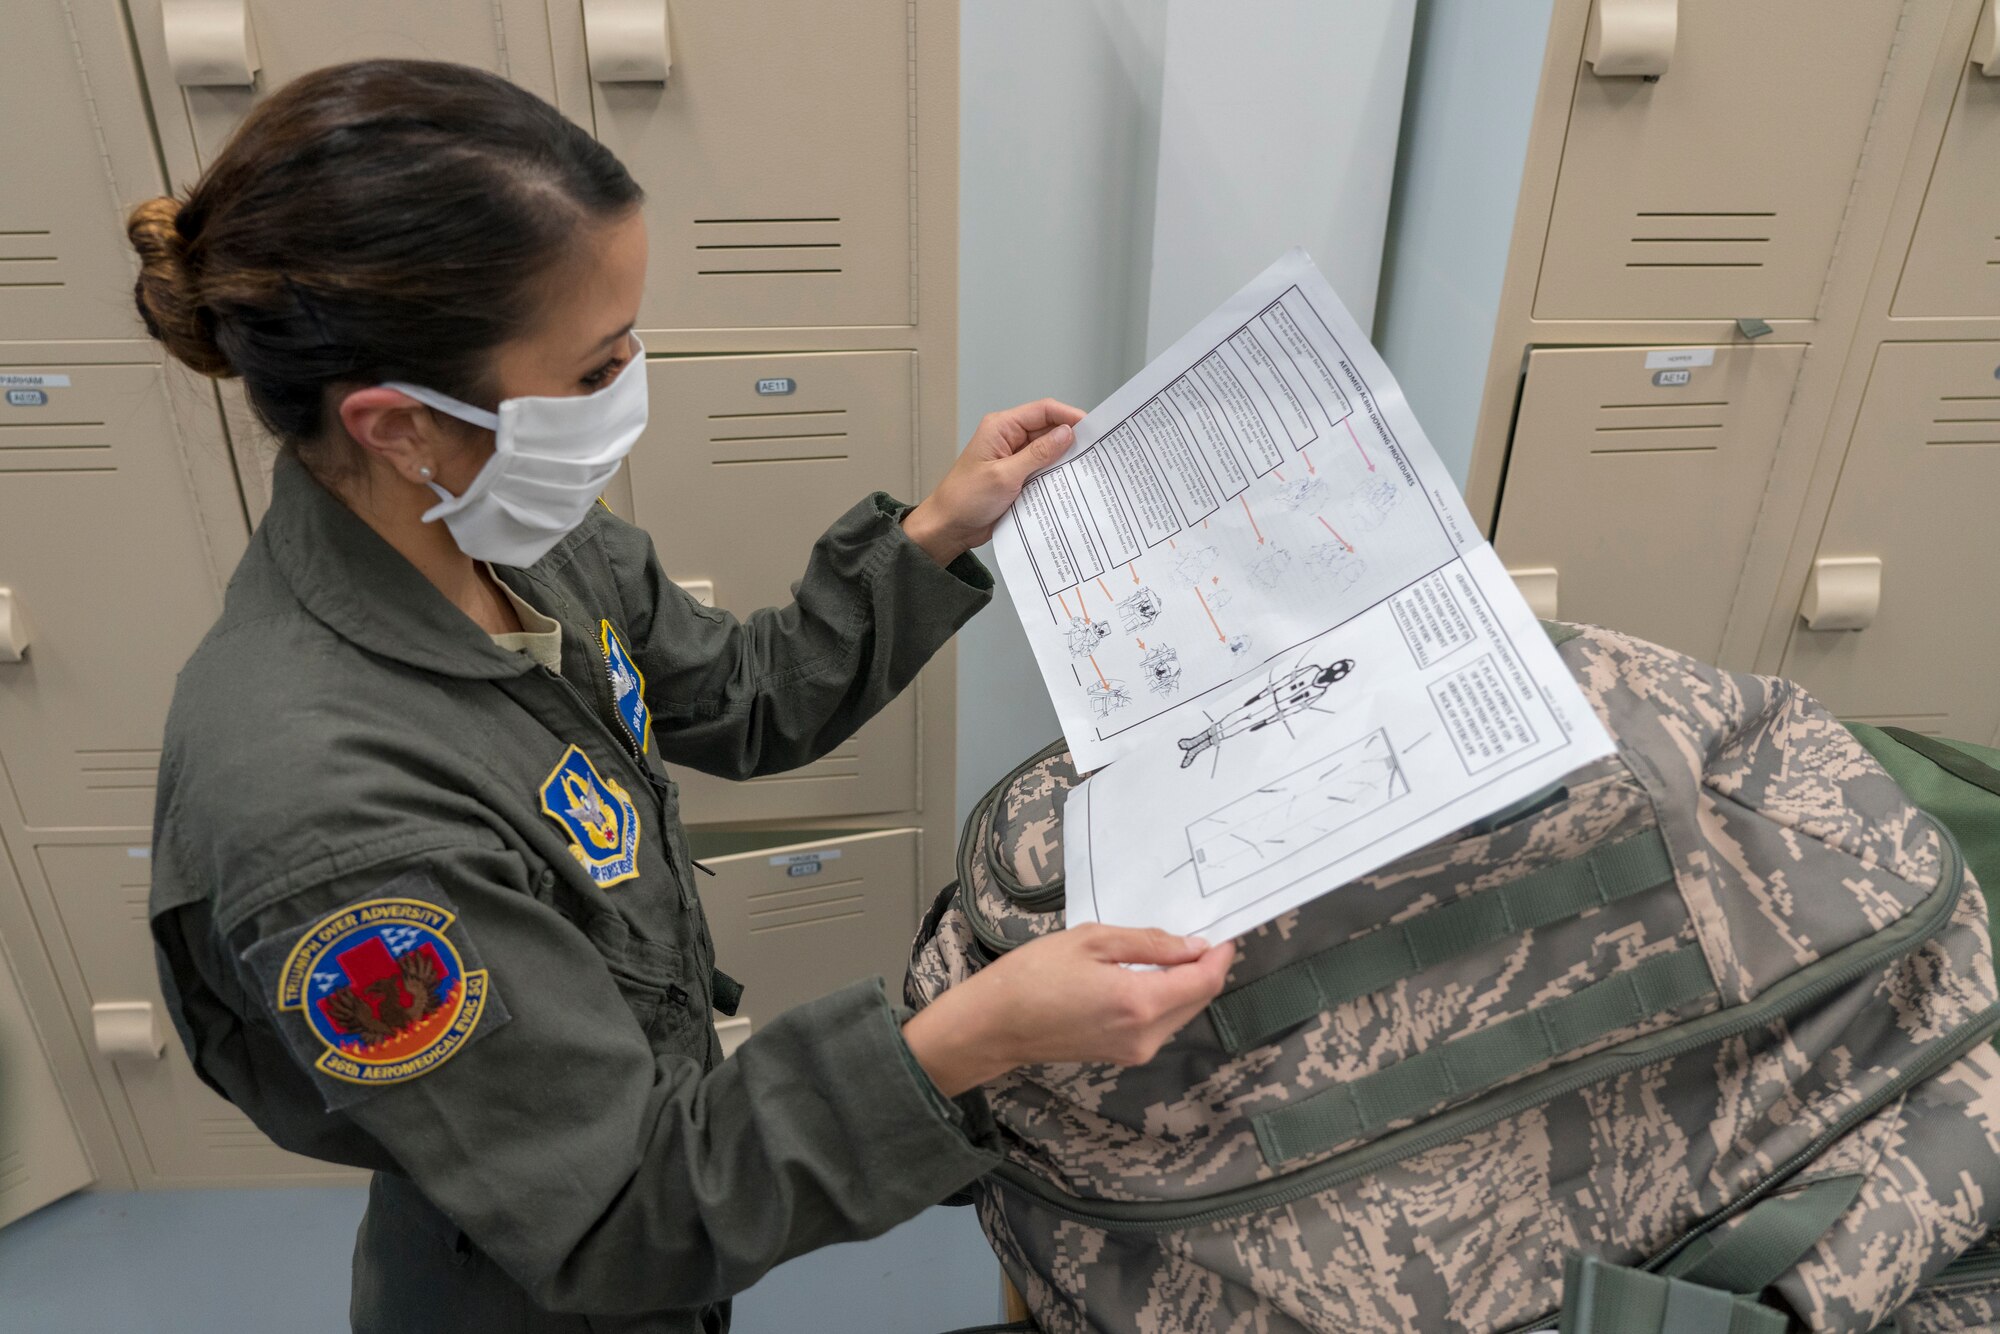 Senior Airman Emilie Canlas, 36th Aeromedical Evacuation Squadron aeromedical evacuation technician, reads over her checklist of assigned equipment April 9, 2020 at Keesler Air Force Base, Miss. The call for aeromedical support came just days after the Air Force Reserve mobilized more than 120 medical personnel across the nation to Joint Base McGuire-Dix-Lakehurst, New Jersey, to help with the fight against COVID-19 in New York City. The specific mission details of the aeromedical evacuation teams mobilizing today are still in coordination, but these Air Force Reservists can provide critical patient care at any location worldwide. (U.S. Air Force photo by Tech. Sgt. Christopher Carranza)